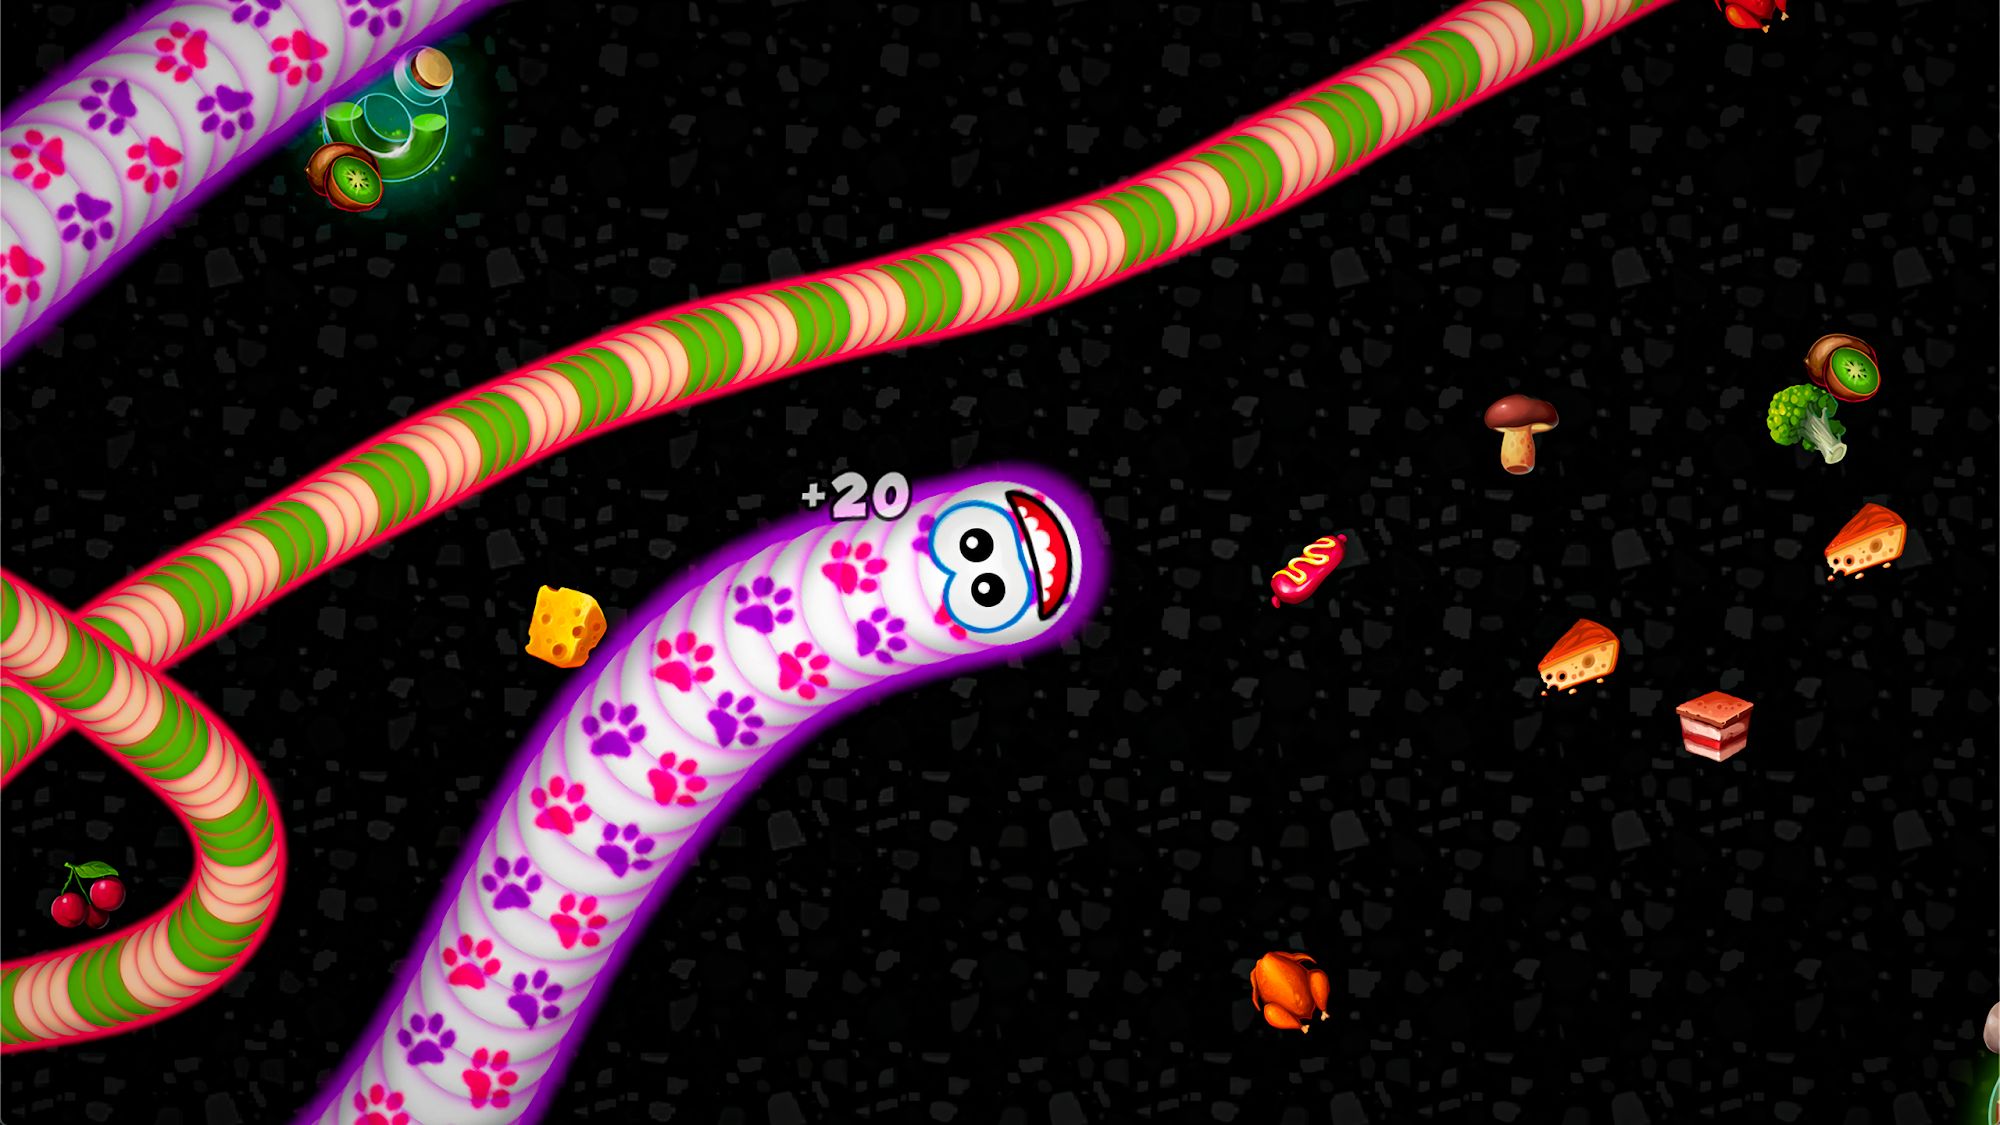 Scarica Worms Zone .io - Hungry Snake gratis per Android.